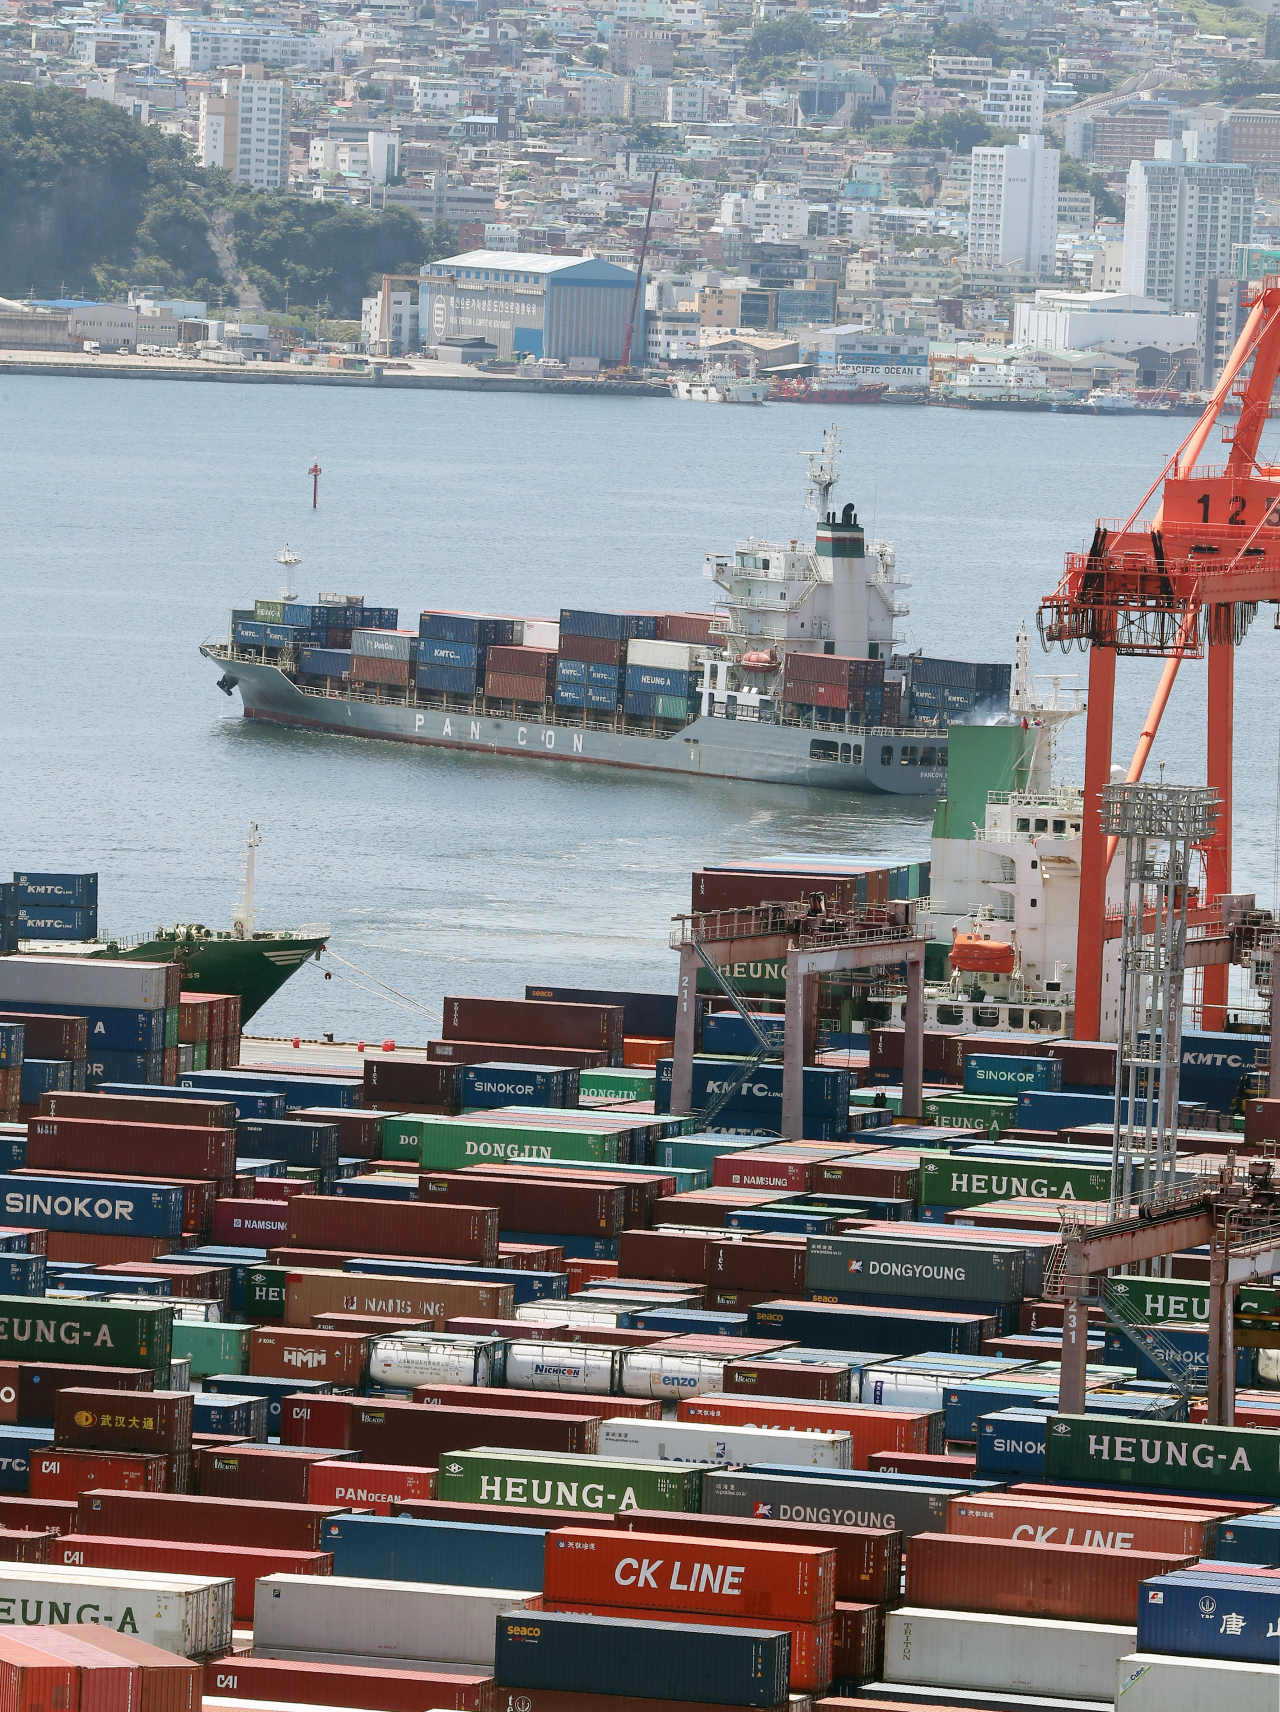 A container ship sails from a port in South Korea's largest port city of Busan, last Monday. South Korea's exports rose 3.9 percent on-year in the first 20 days of August on robust demand for petroleum products and autos, but the country saw its trade deficit widen on soaring fuel costs, according to data from the Korea Customs Service. (Yonhap)